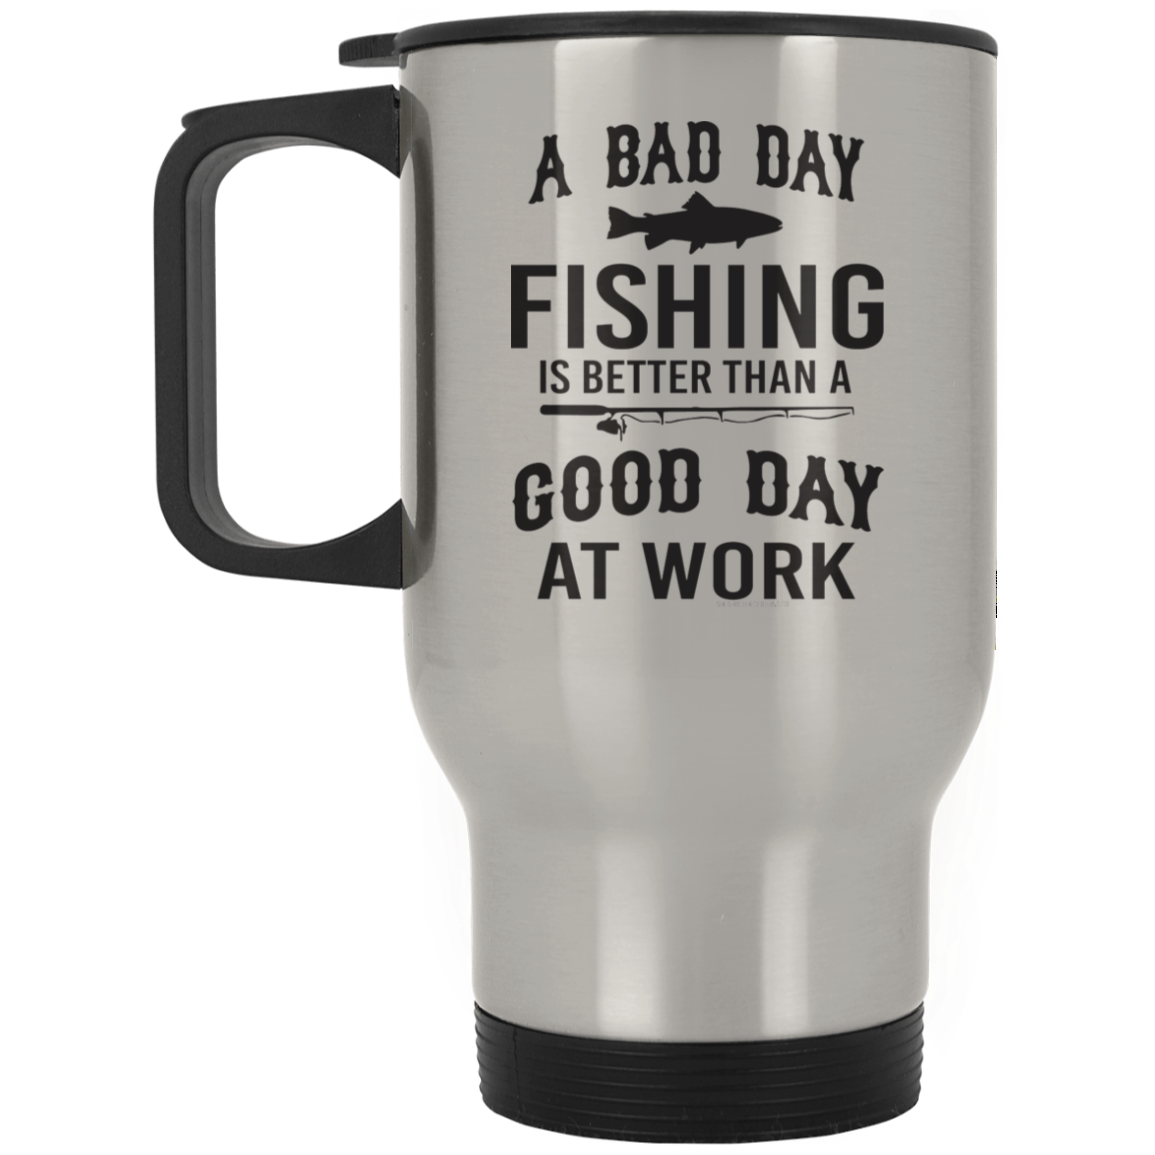 A Bad Day Fishing is Better Than a Good Day at Work